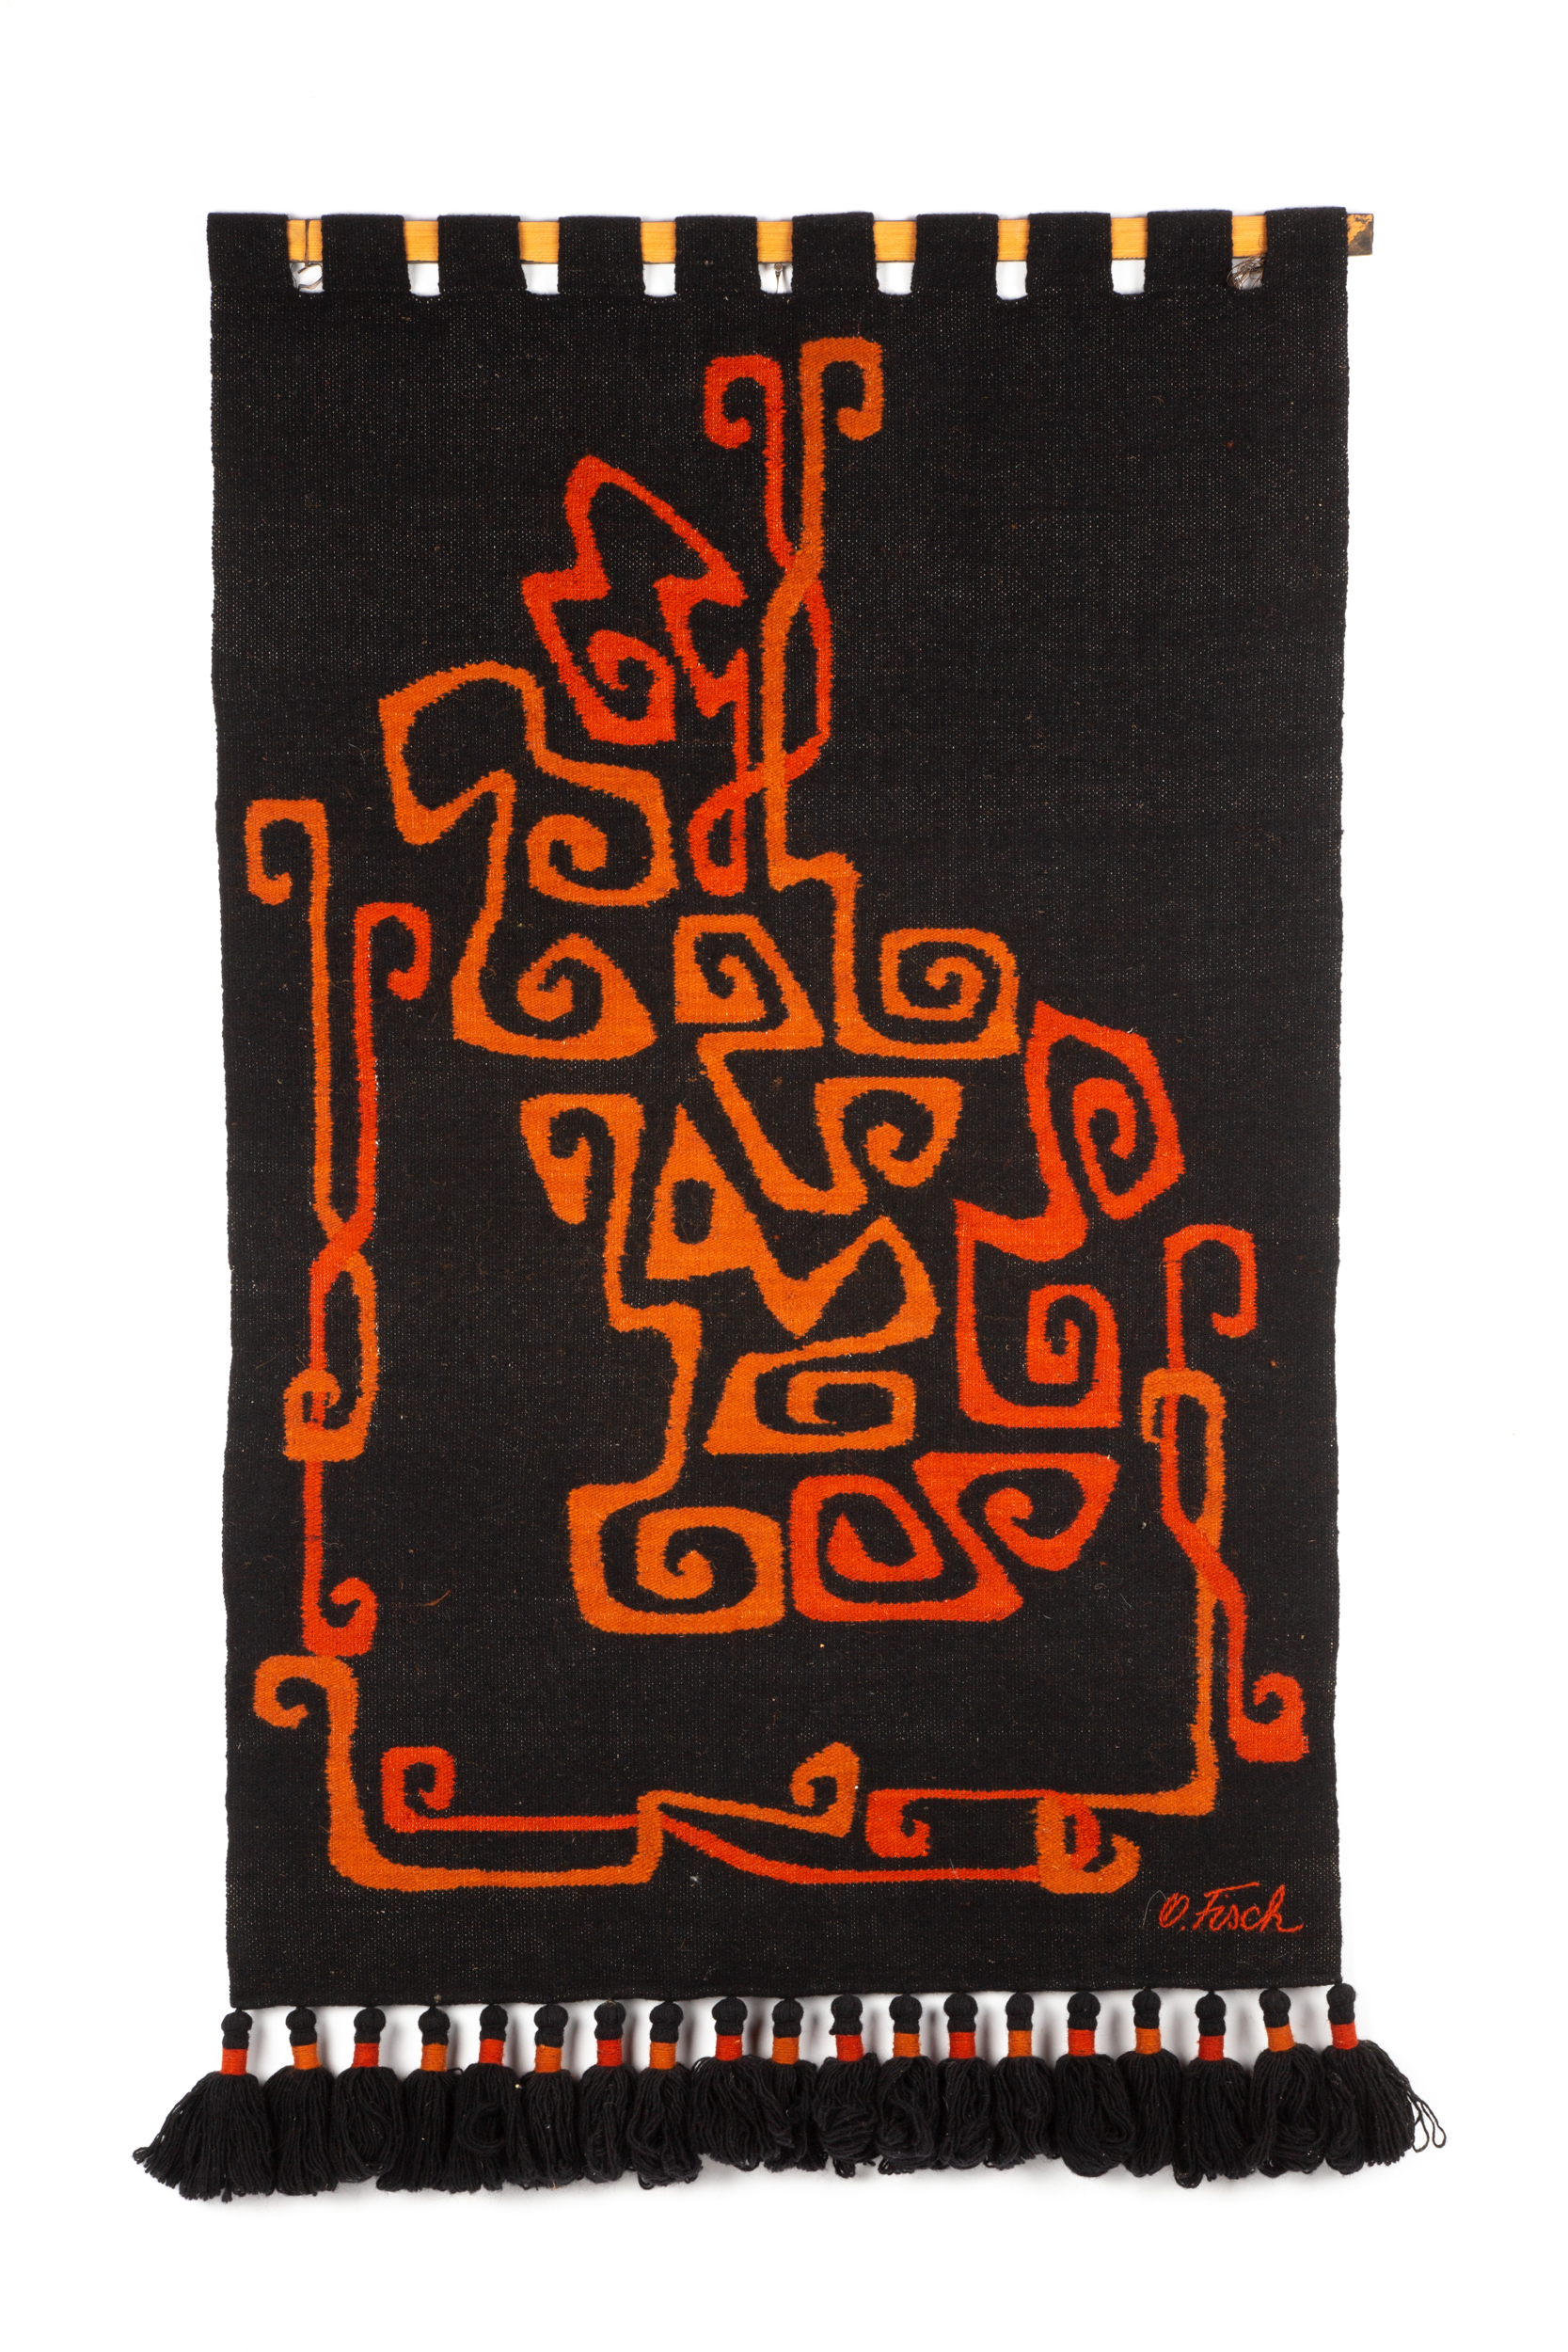 OLGA FISCH WALL HANGING TAPESTRY 352eb9